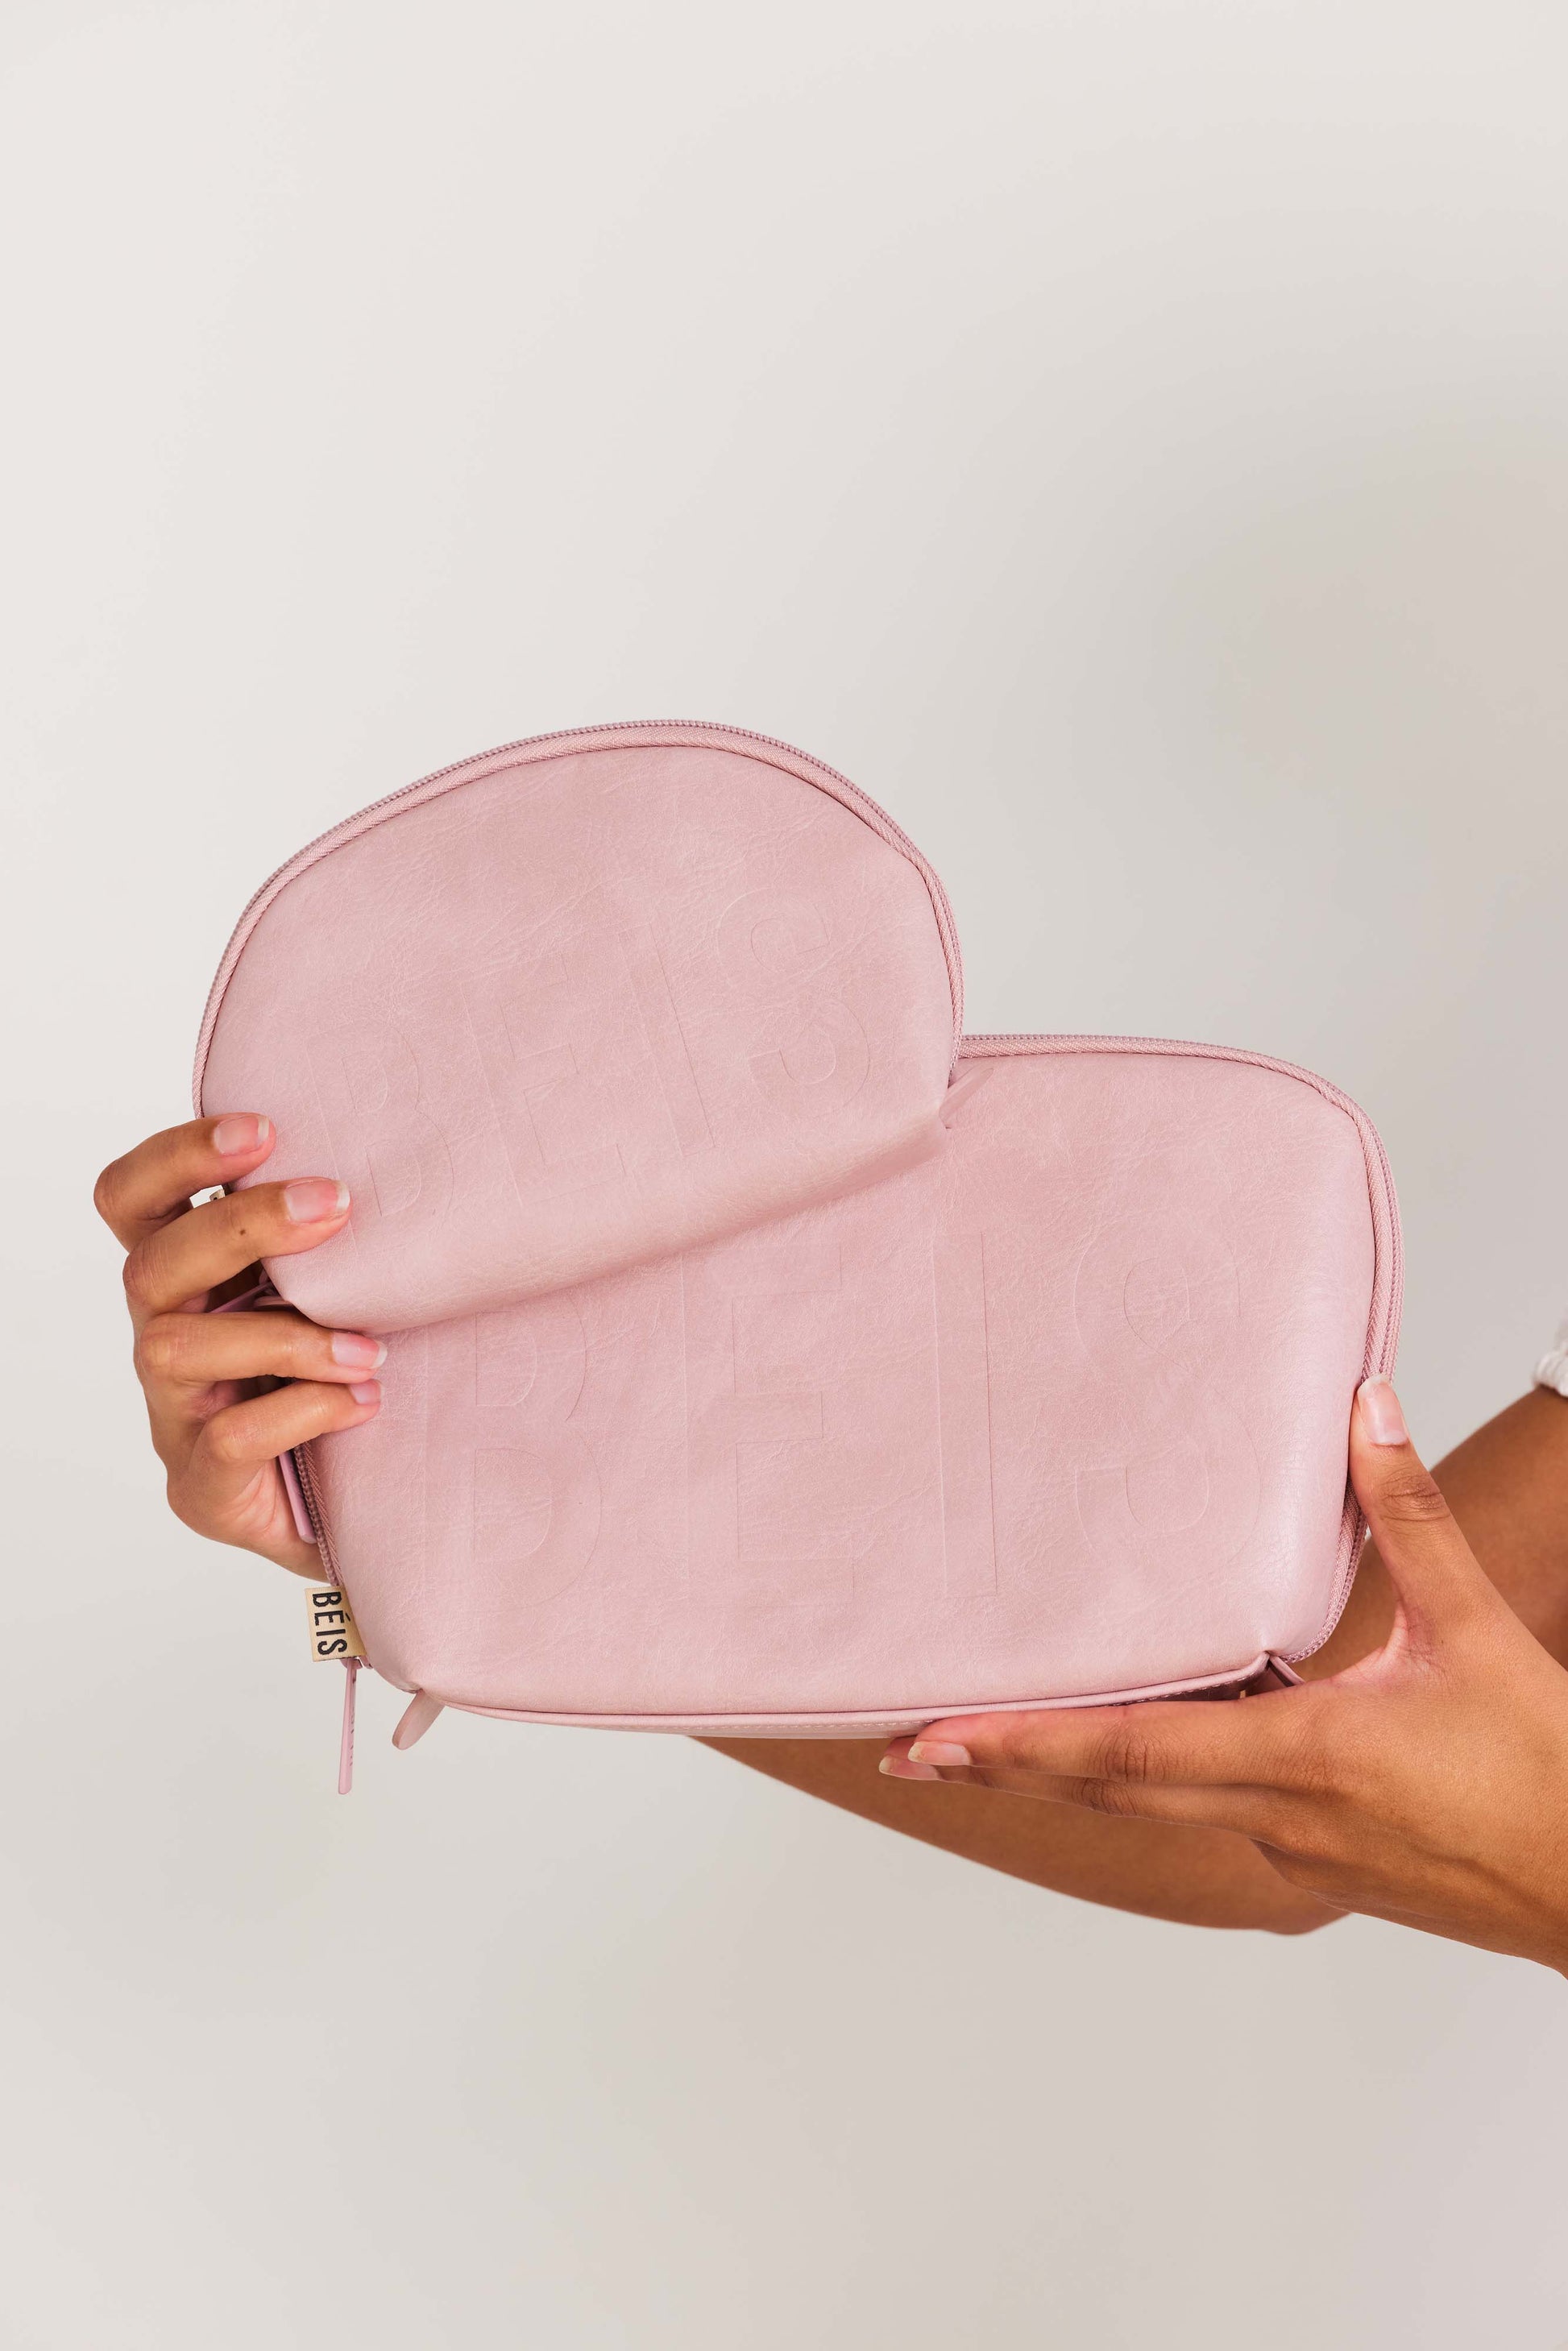 Beis The Cosmetic Pouch Set in Pink